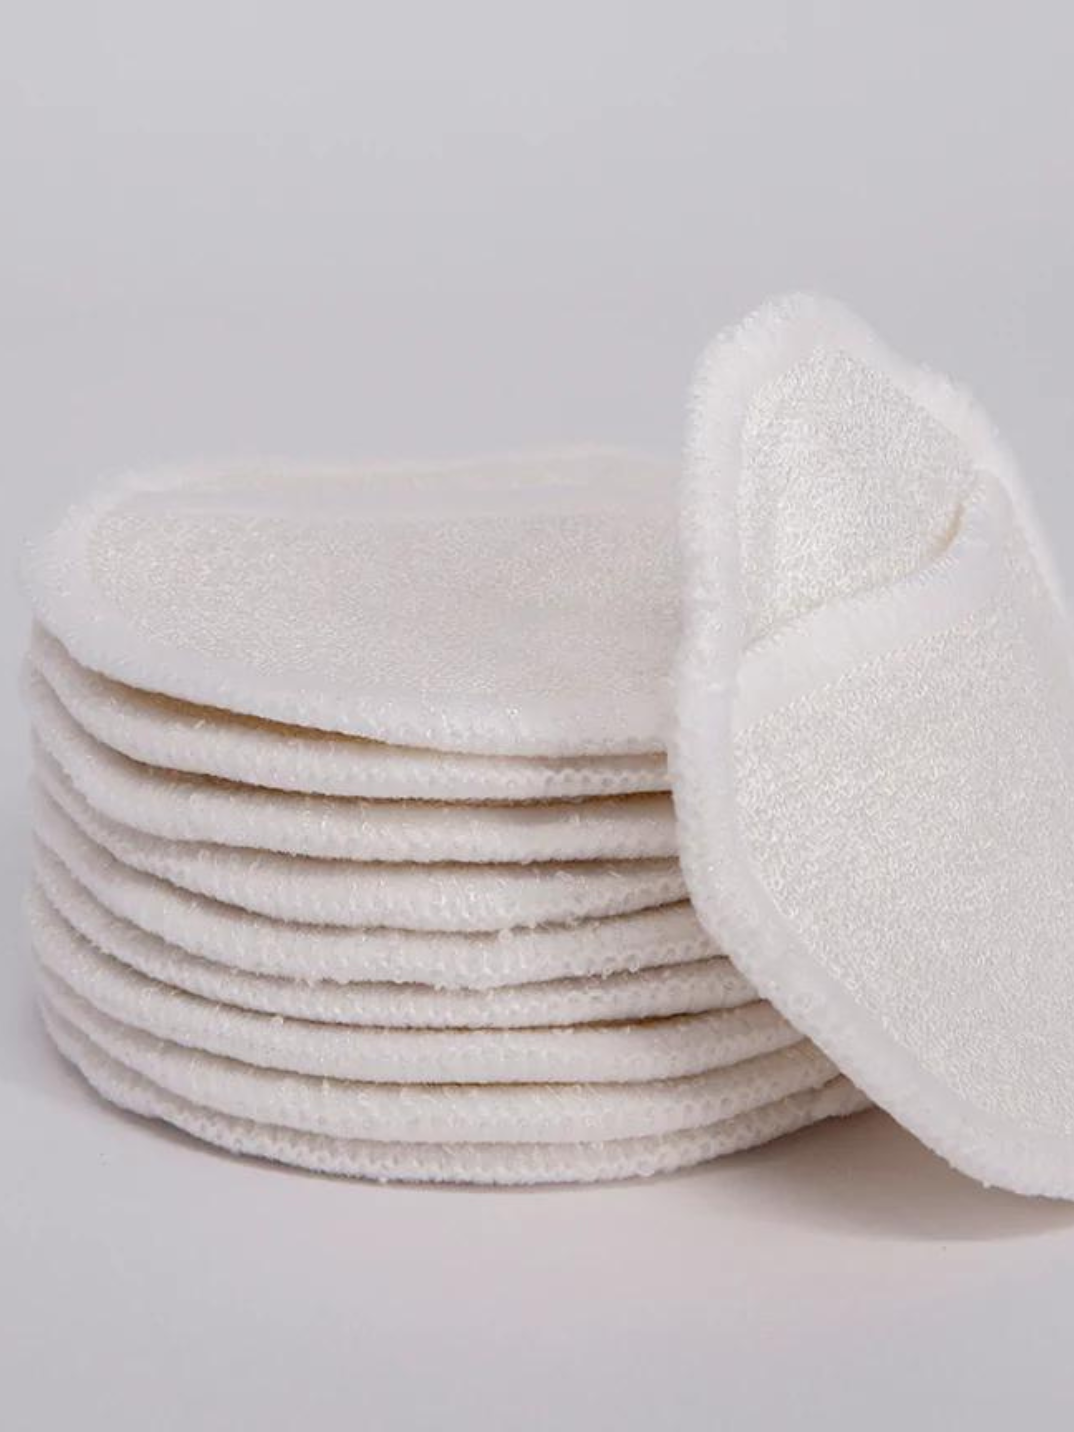 Our 100% bamboo fiber reusable face wipes are a great sustainable alternative to disposable facial rounds, single-use wipes, or cotton pads/balls. They're made from a soft terry bamboo that's perfect to use on delicate skin. These wipes have a little fold to put your fingers for easy use.